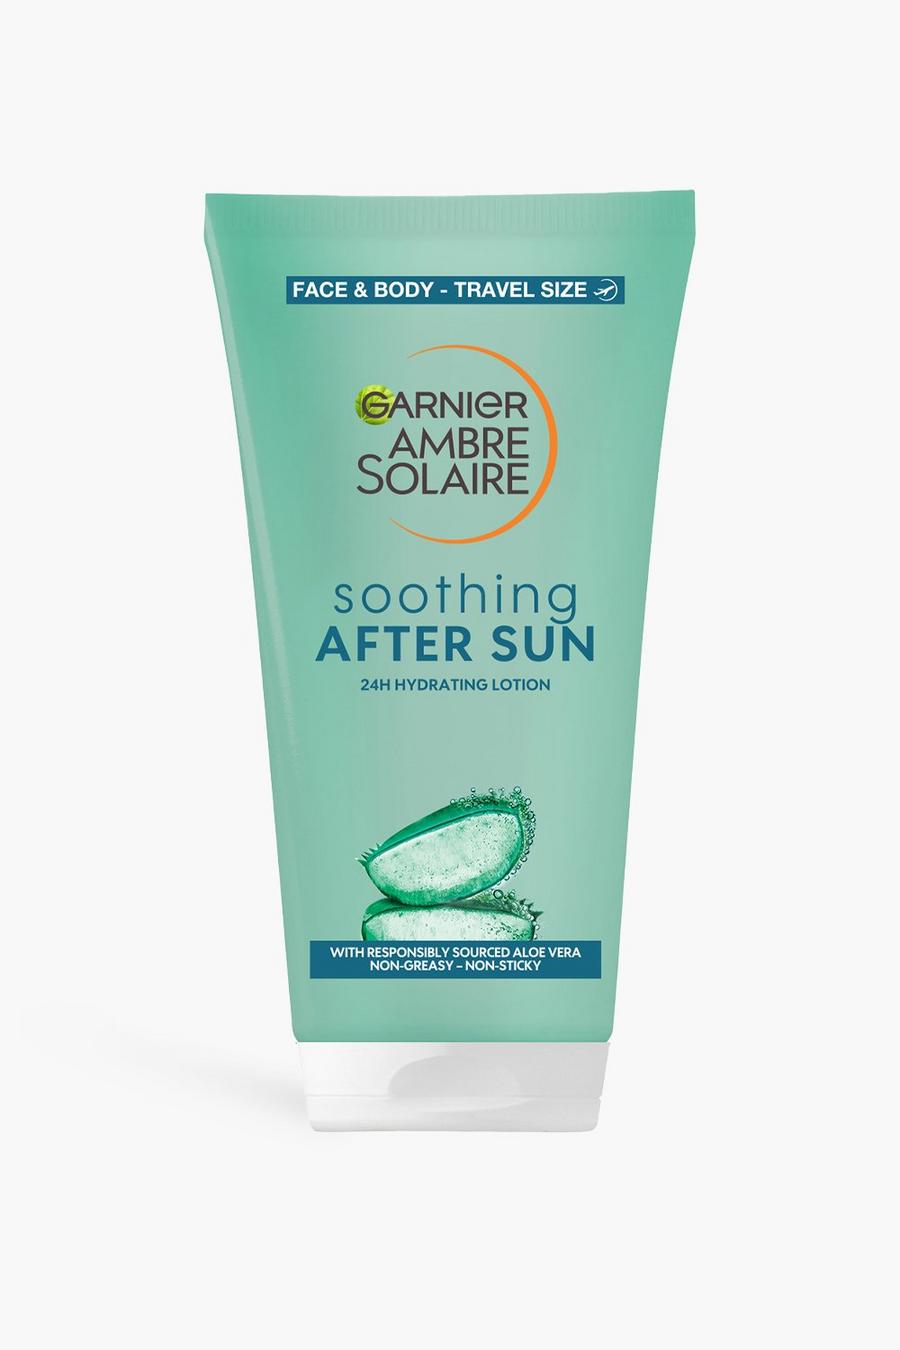 White Garnier Ambre Solaire Hydrating Soothing After Sun Lotion Travel size 100ml (SAVE 17%)